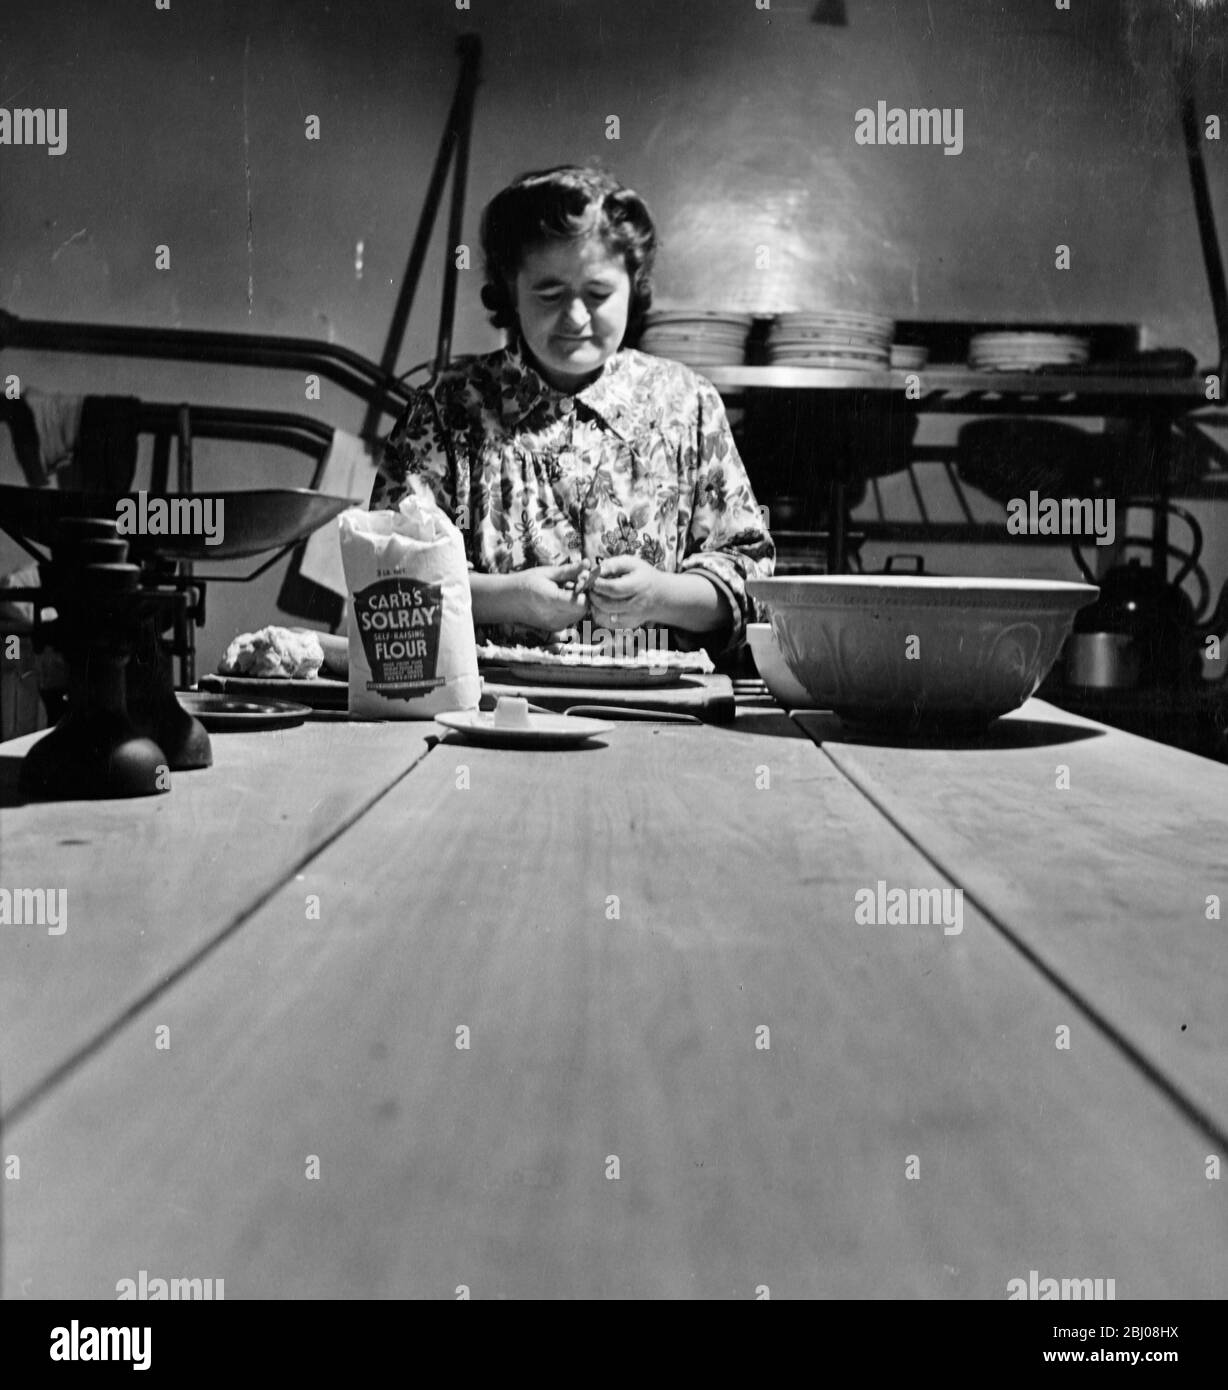 Mrs. Temperley prepares a pie in the kitchen of the Globe Tavern. A state owned pub in Longtown, Carlisle, Cumbria, England. - December 1948 Stock Photo